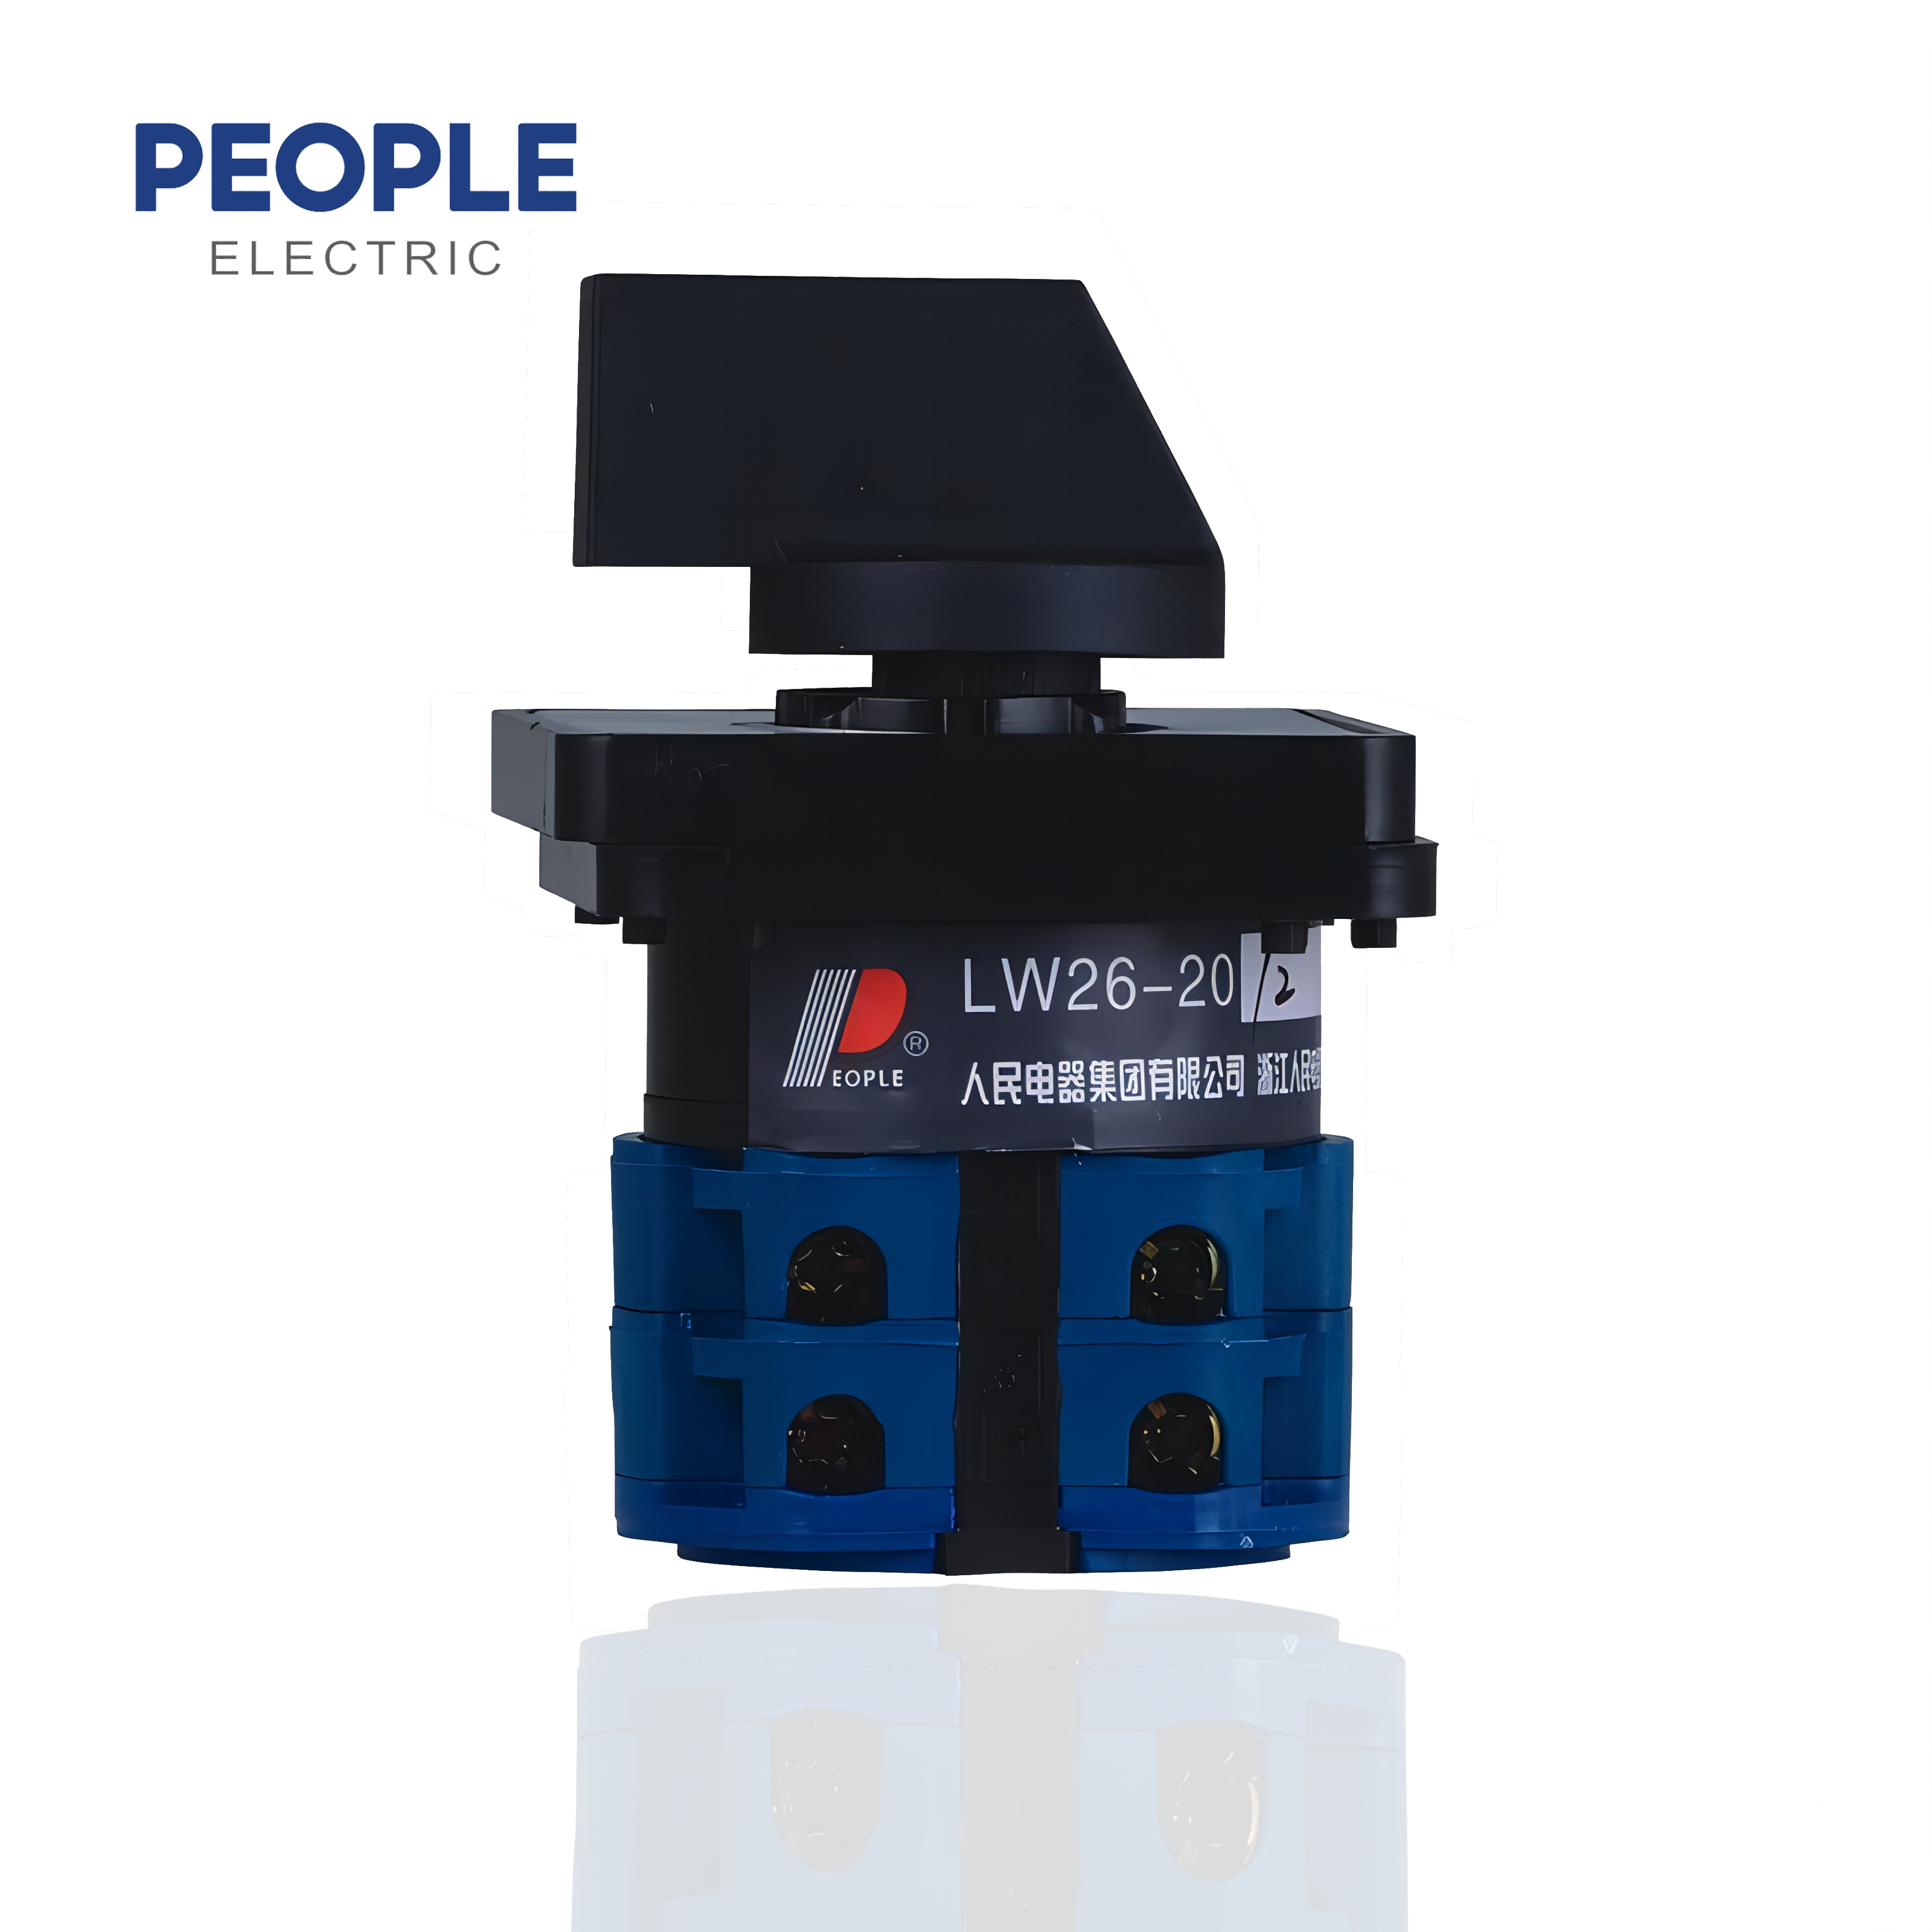 LW26 series universal change-over switch